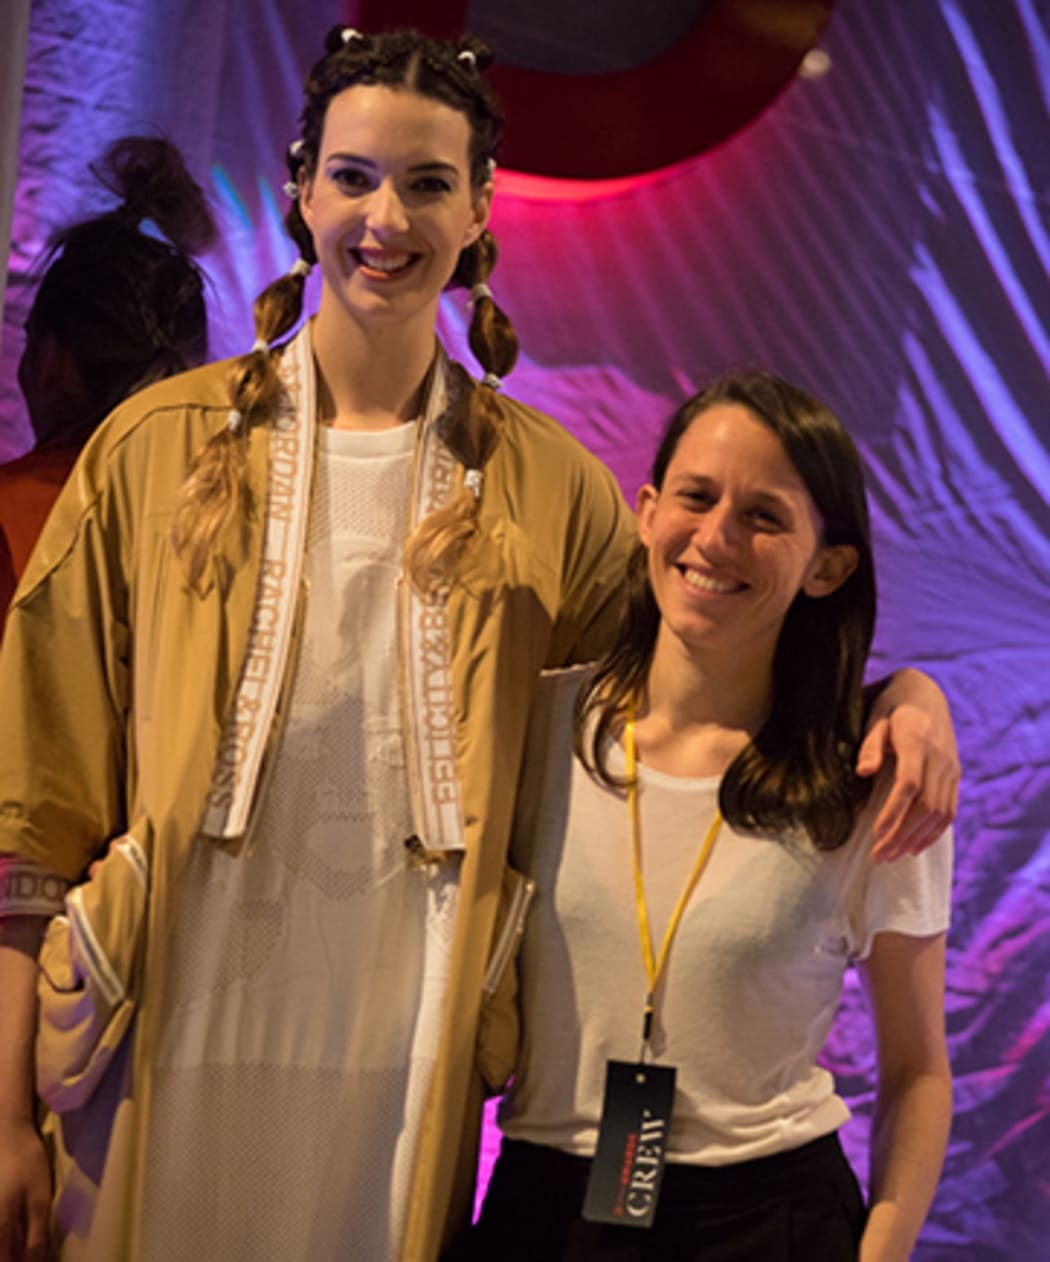 Designer Lila John with a model wearing one of her garments at the iD  Emerging Designer Awards.